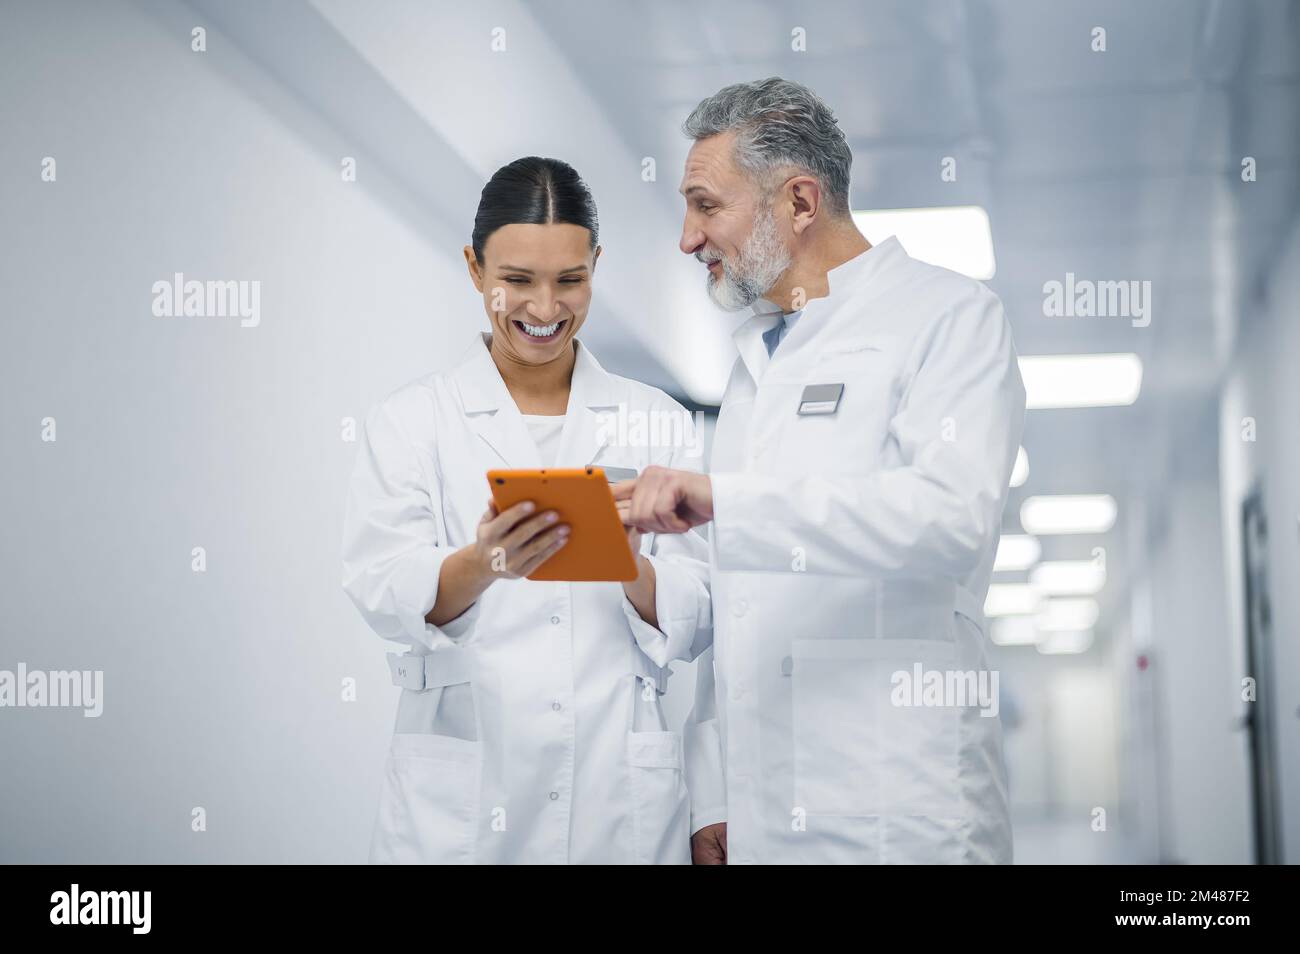 Colleagues discussing something in the clinic corridor Stock Photo